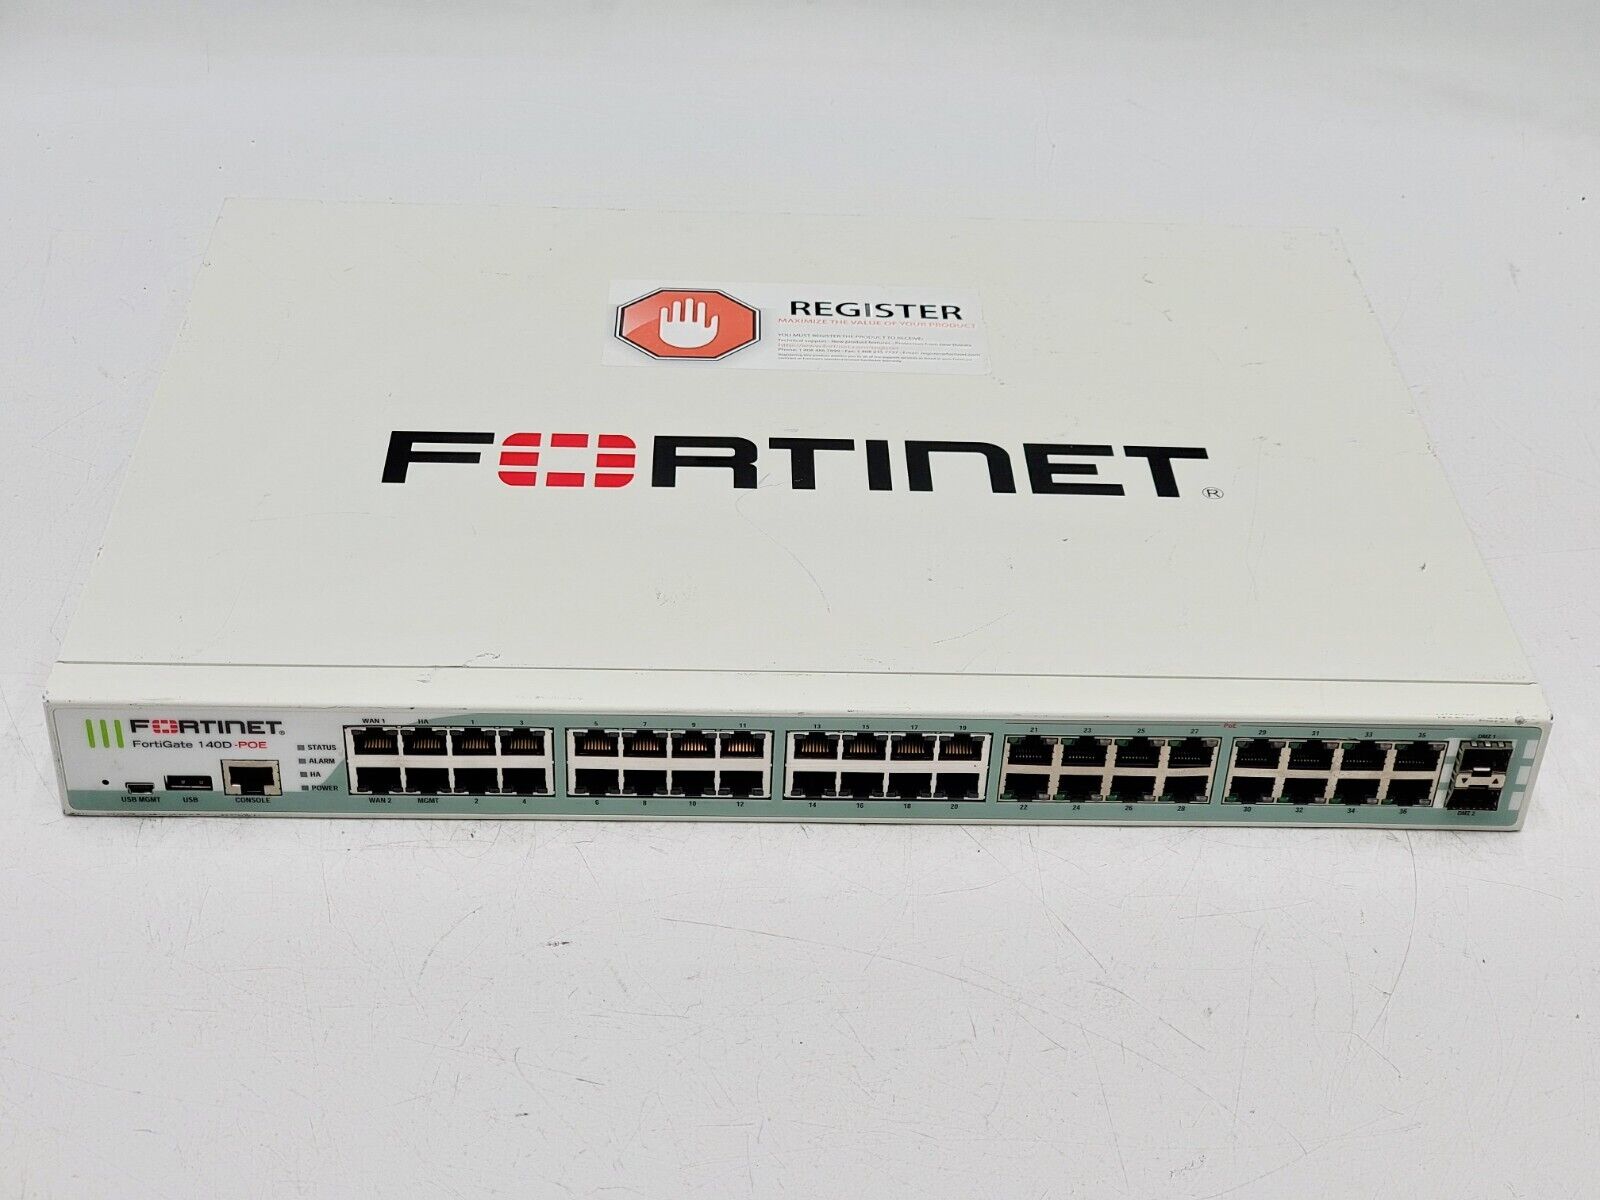 Fortinet FG-140D-POE 40-Port Firewall with PoE